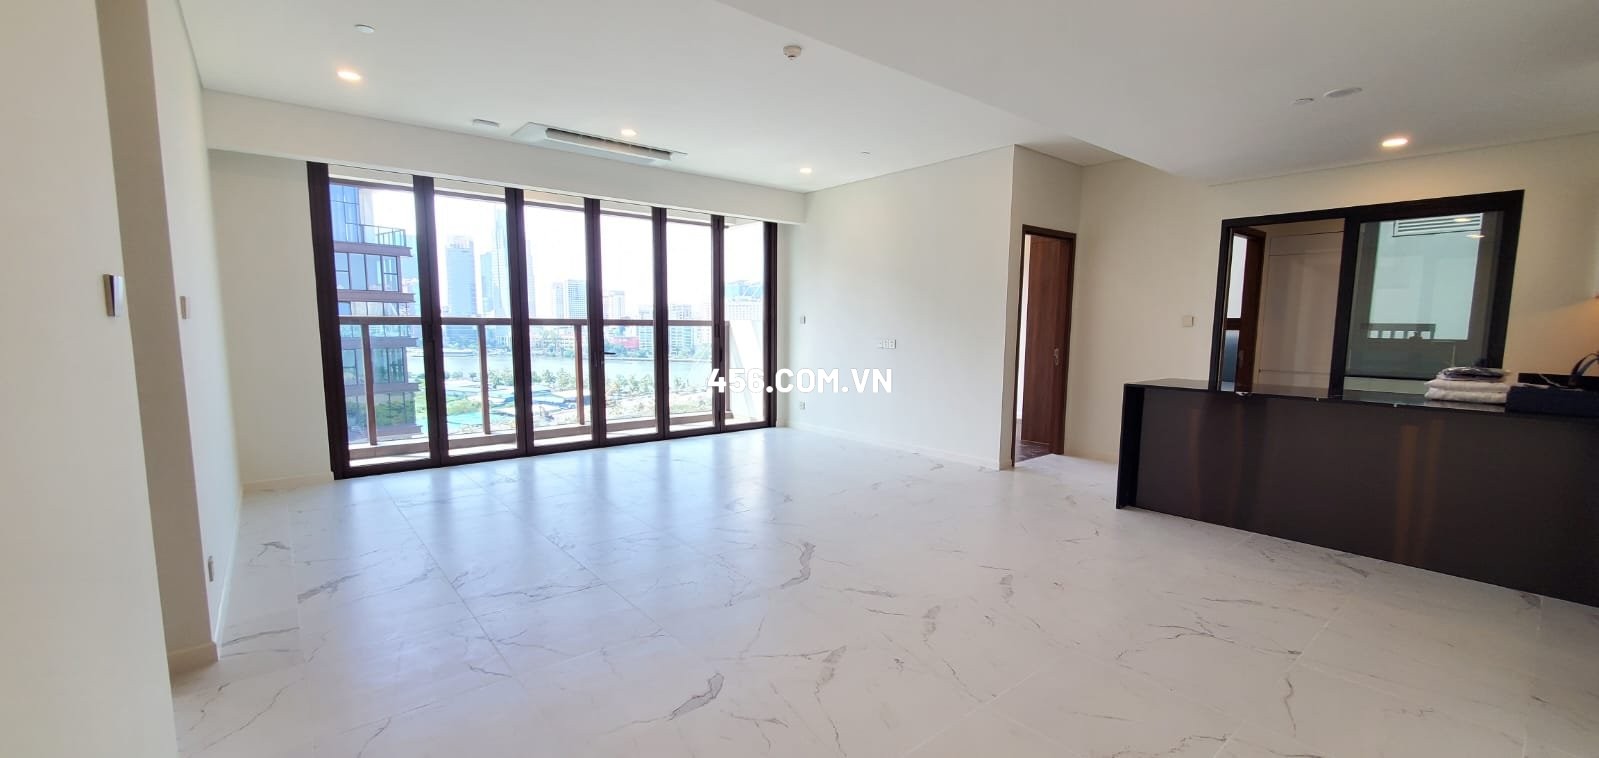 Hinh-3 Bedrooms The Metropole Thu Thiem apartment for rent with furniture